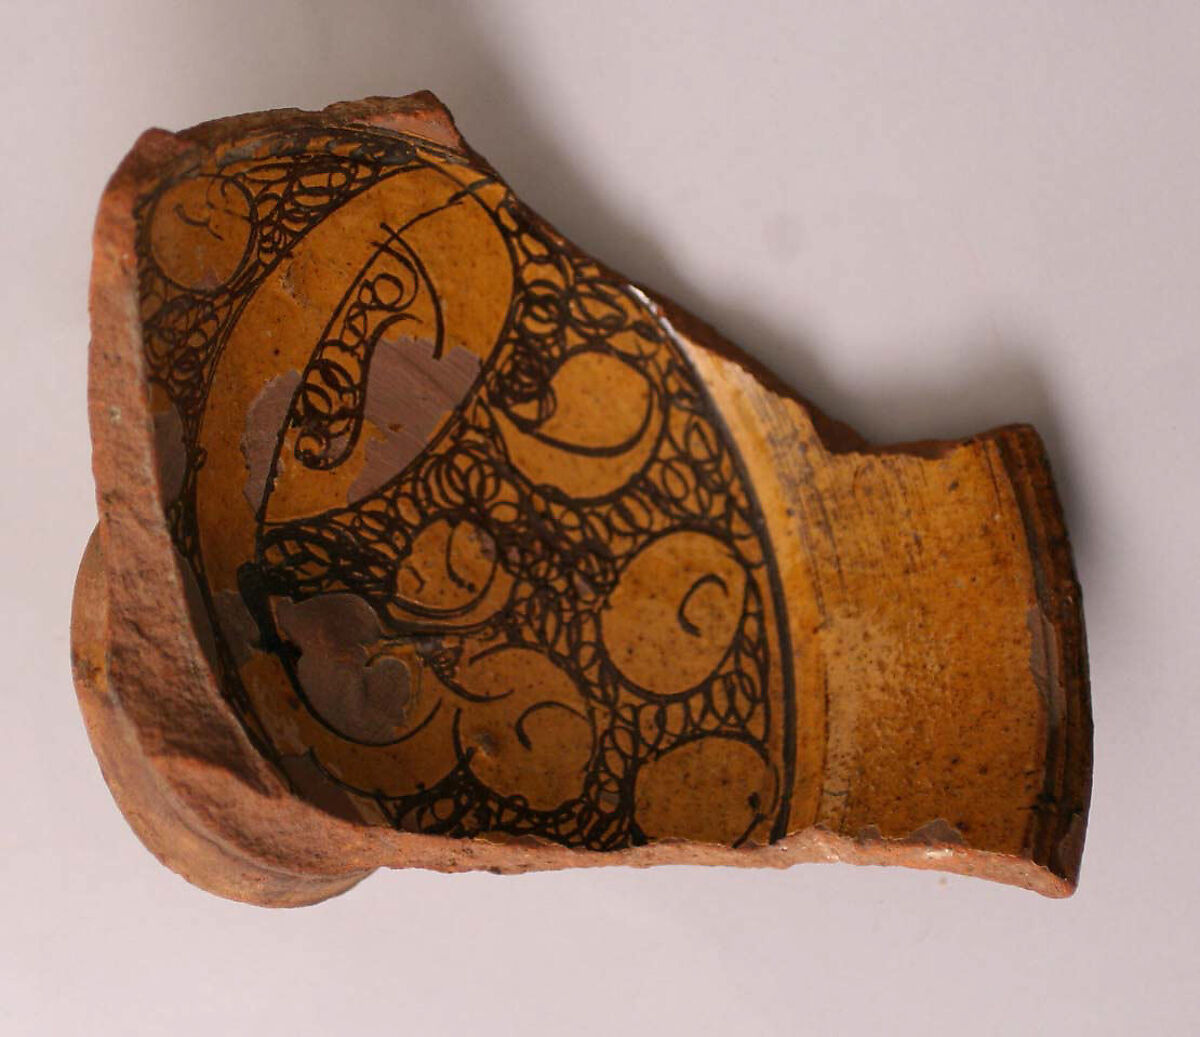 Fragment of a Bowl, Earthenware; incised decoration through white slip and coloring under transparent glaze. 